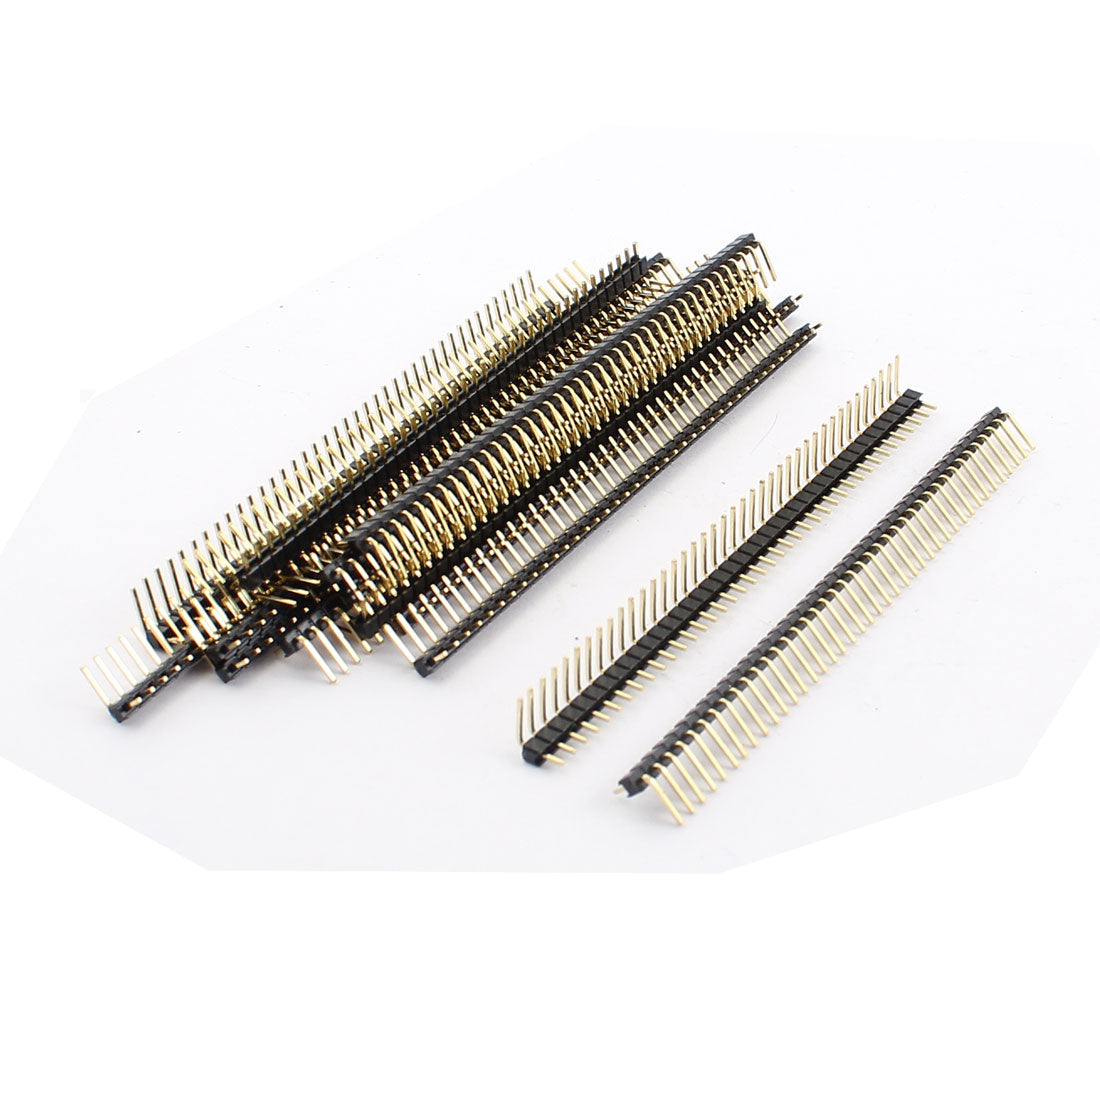 uxcell Uxcell 17 Pcs PBC 40Pin 2.54mm Single Row Right Angle Male Header Connector Strip